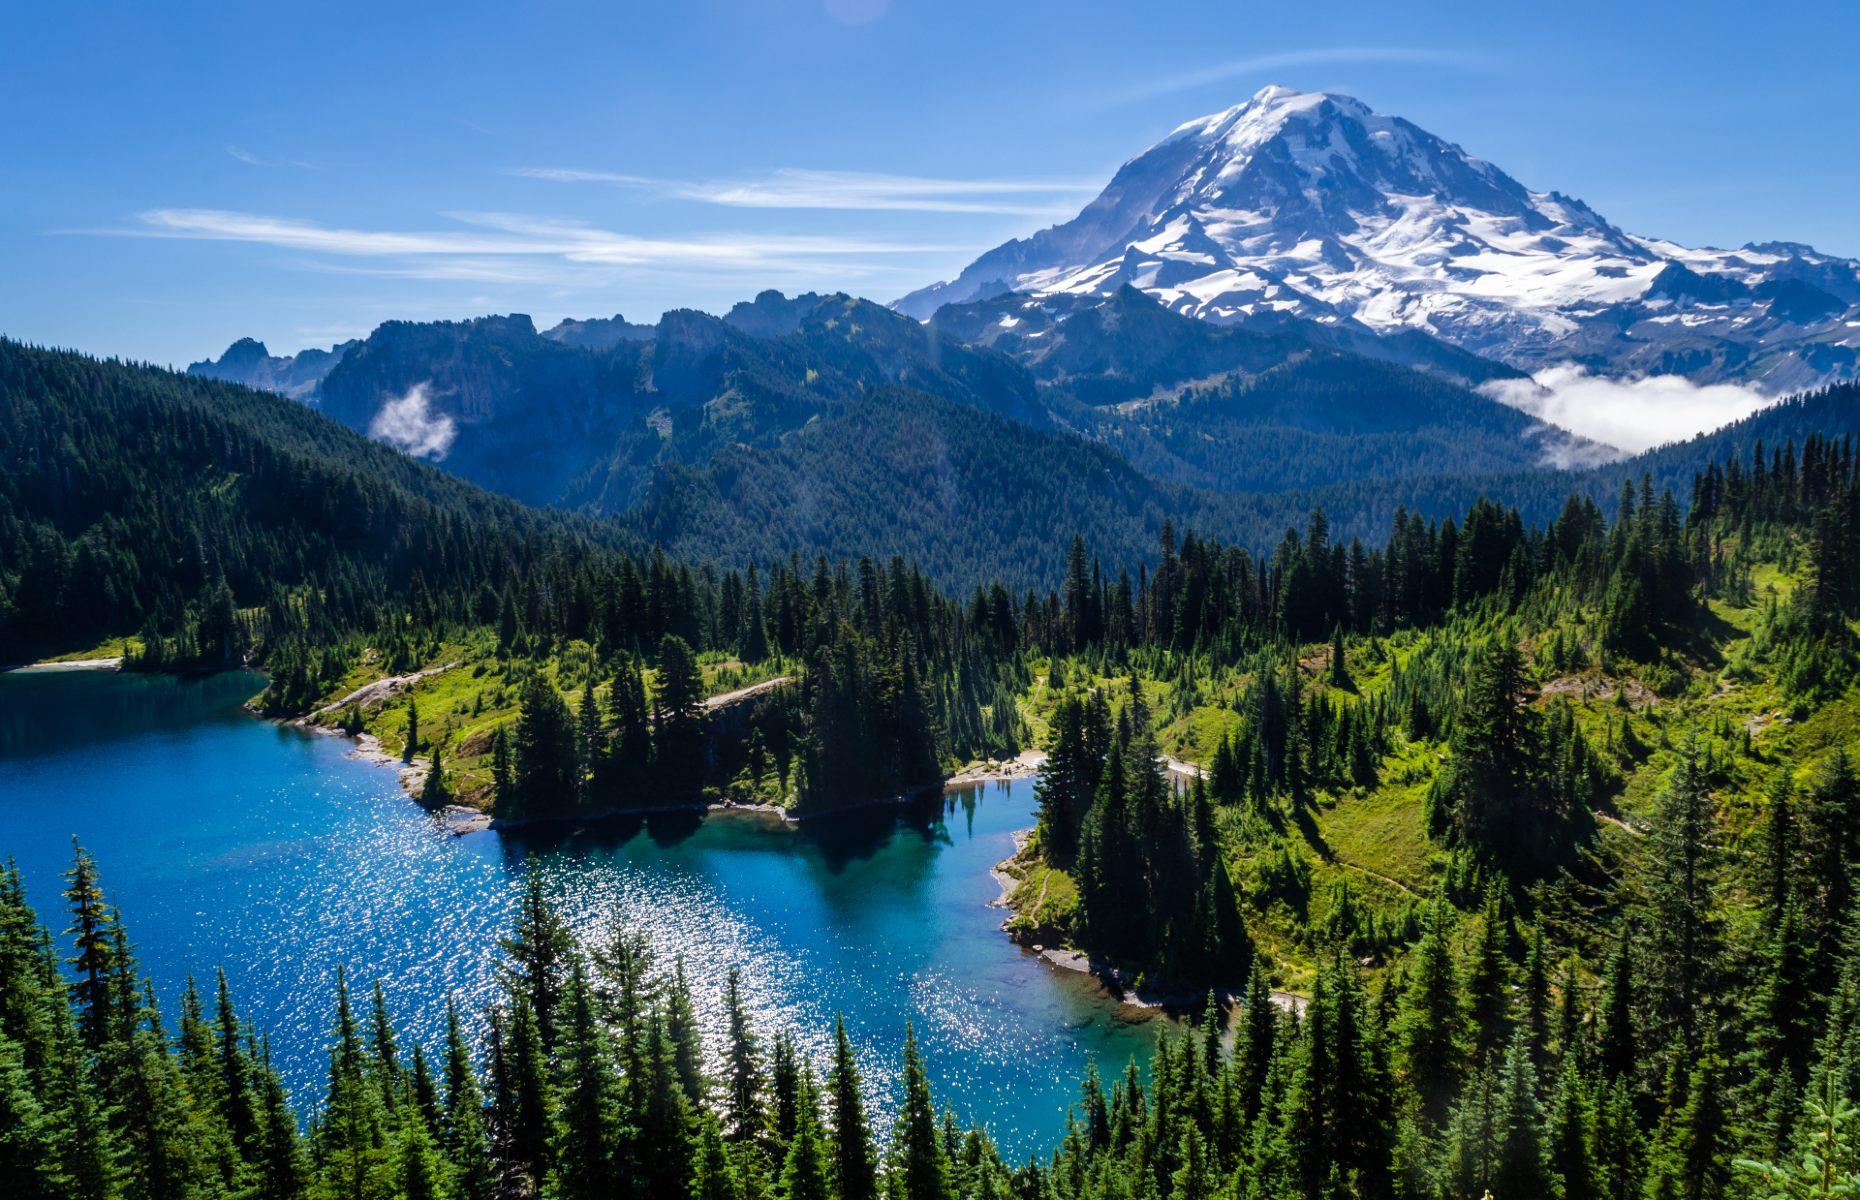 <p>Part of the iconic Washington landscape, Mount Rainier is an active volcano with a surrounding national park that features incredible wildlife. With over 275 miles (440km) of hiking trails that lead through verdant forest and subalpine ridges, your visit will be full of discovery and adventure. <a href="https://www.nps.gov/mora/index.htm">Mount Rainier National Park</a> has five developed areas where you can find a museum, climbing centers and ranger stations, alongside three major drive-in campgrounds for you to pitch up with your RV and stay the night. </p>